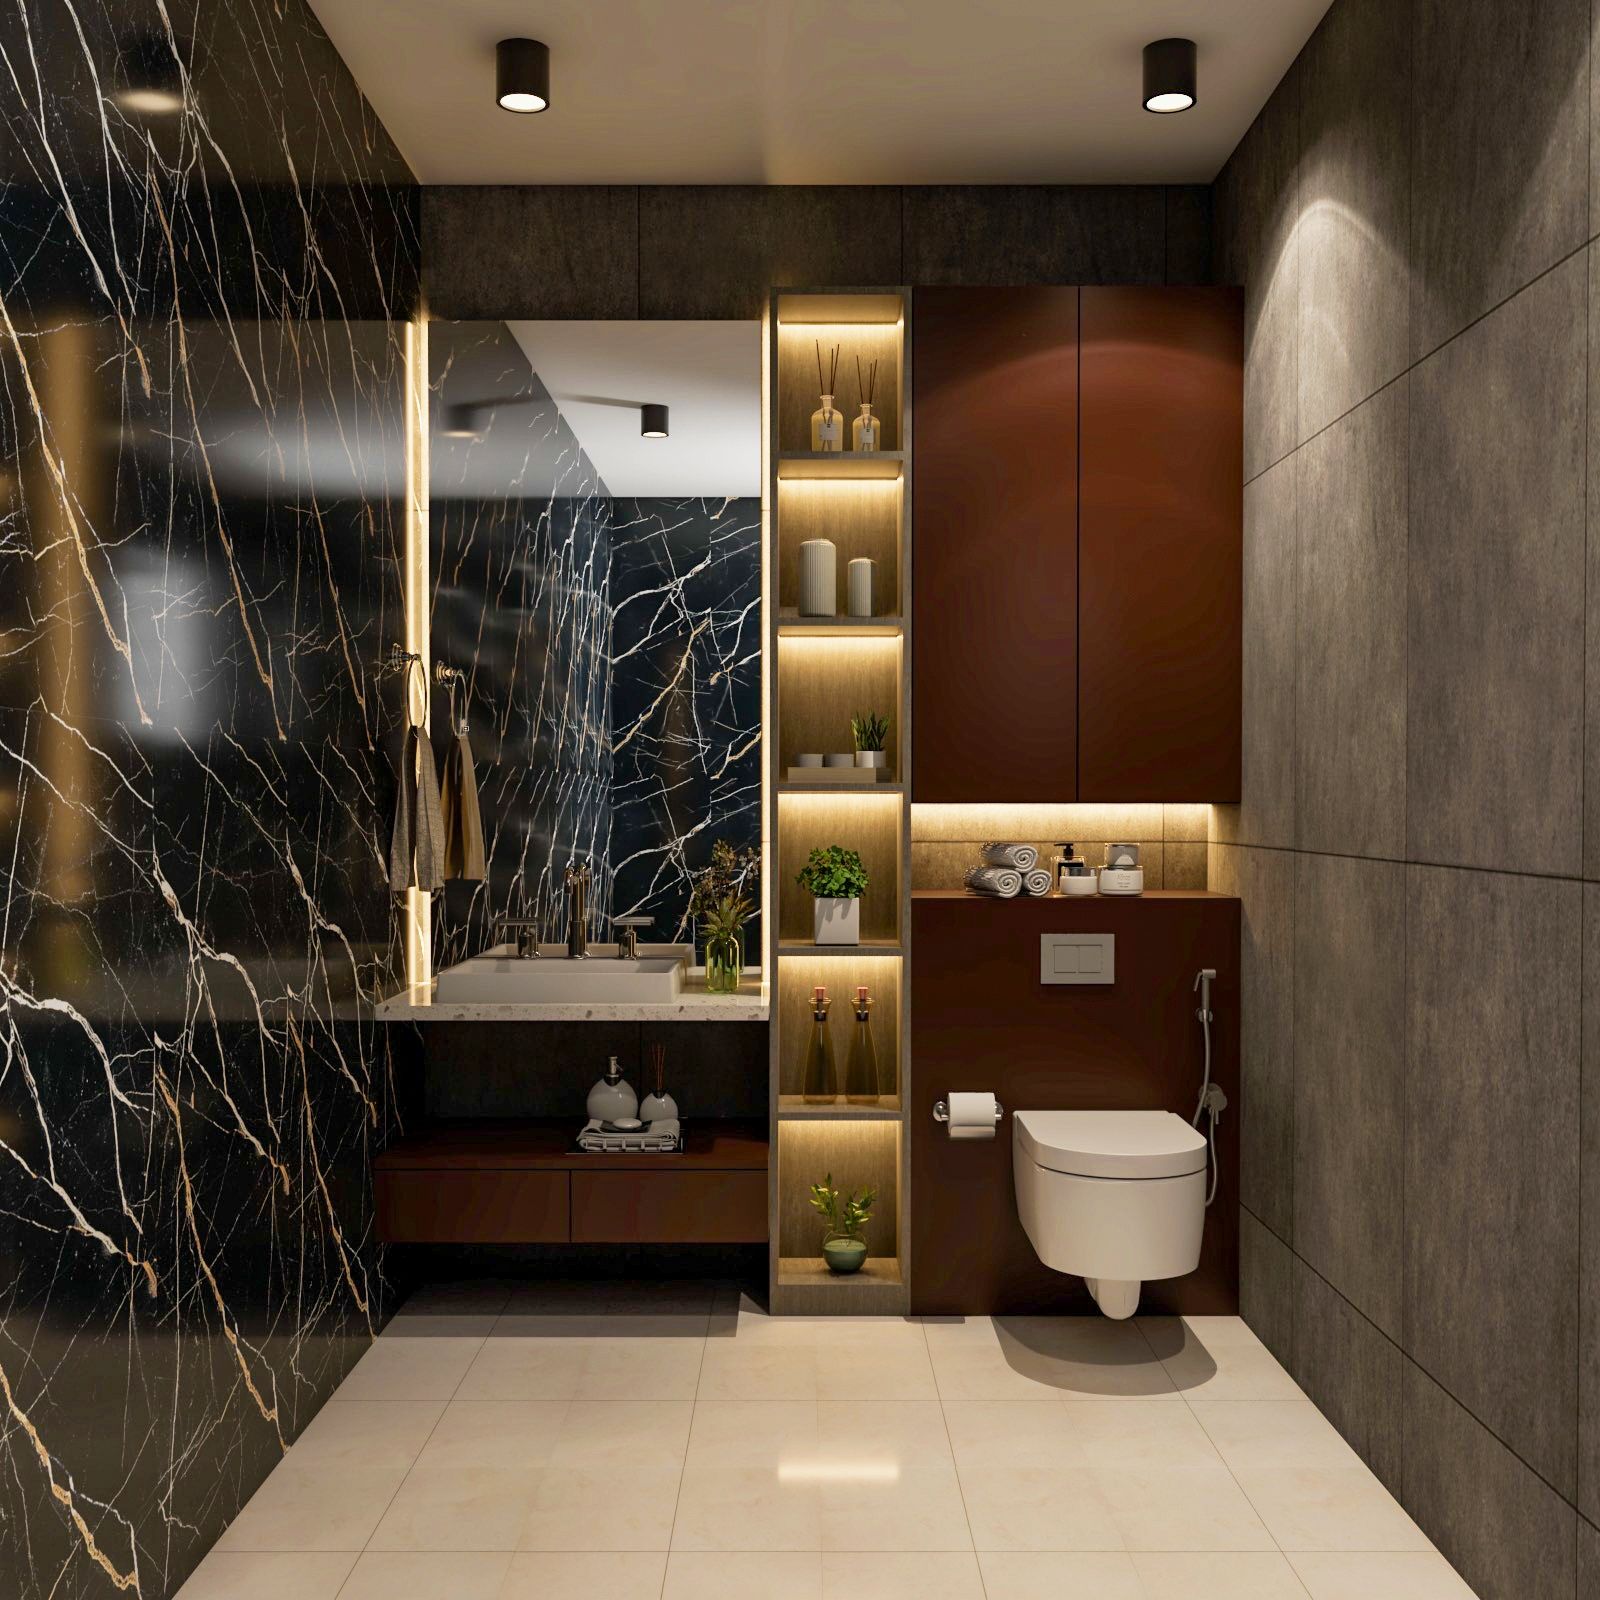 Modern Bathroom Design With Floor-To-Ceiling Wall Shelves